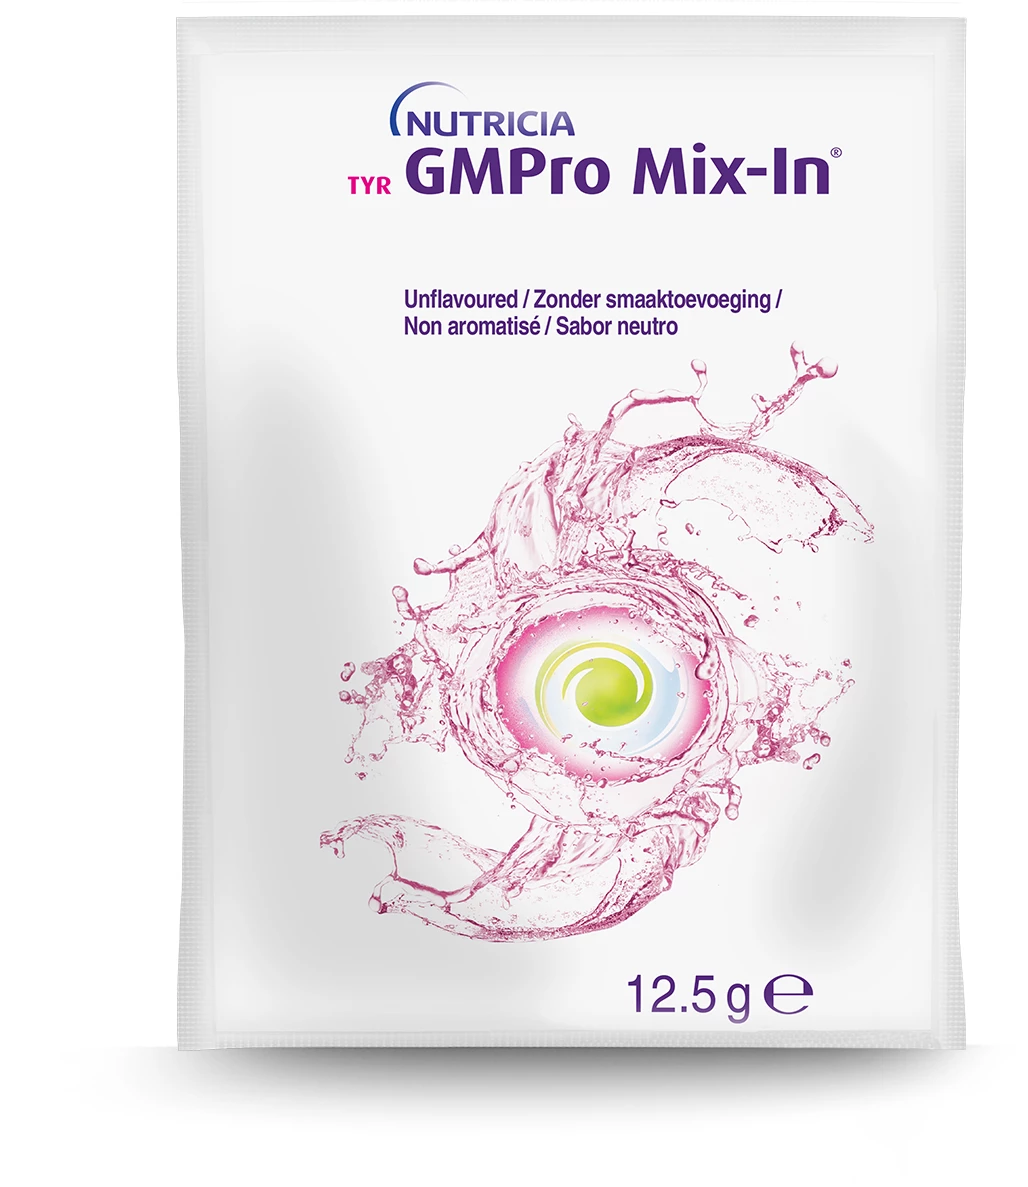 TYR GMPro Mix-In